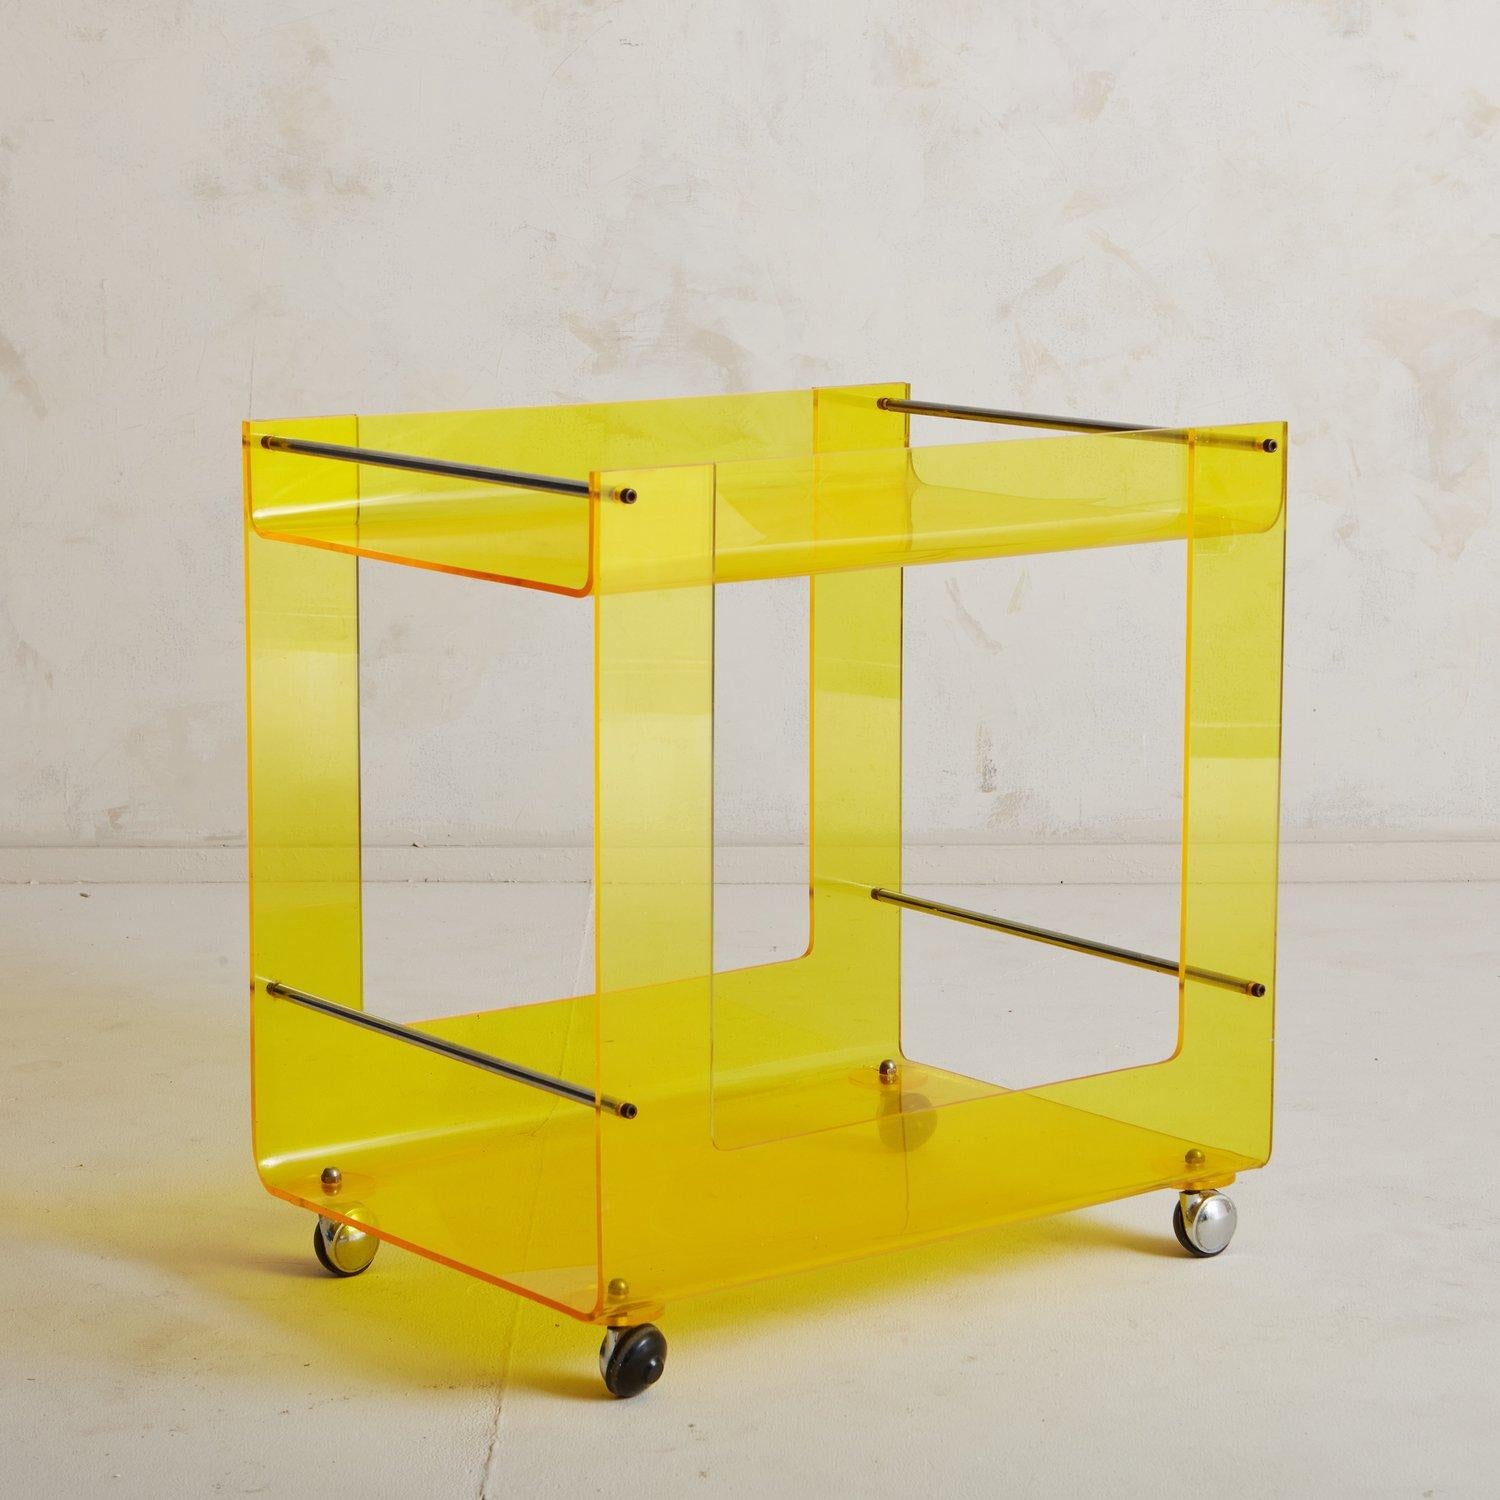 A 1960s yellow lucite bar cart attributed to Rafael Carreras Puigdengolas for Tramo. This sleek trolley bar cart has an angular frame with two tiers perfect for displaying your bottles and barware. It has chrome support bars and stands on four